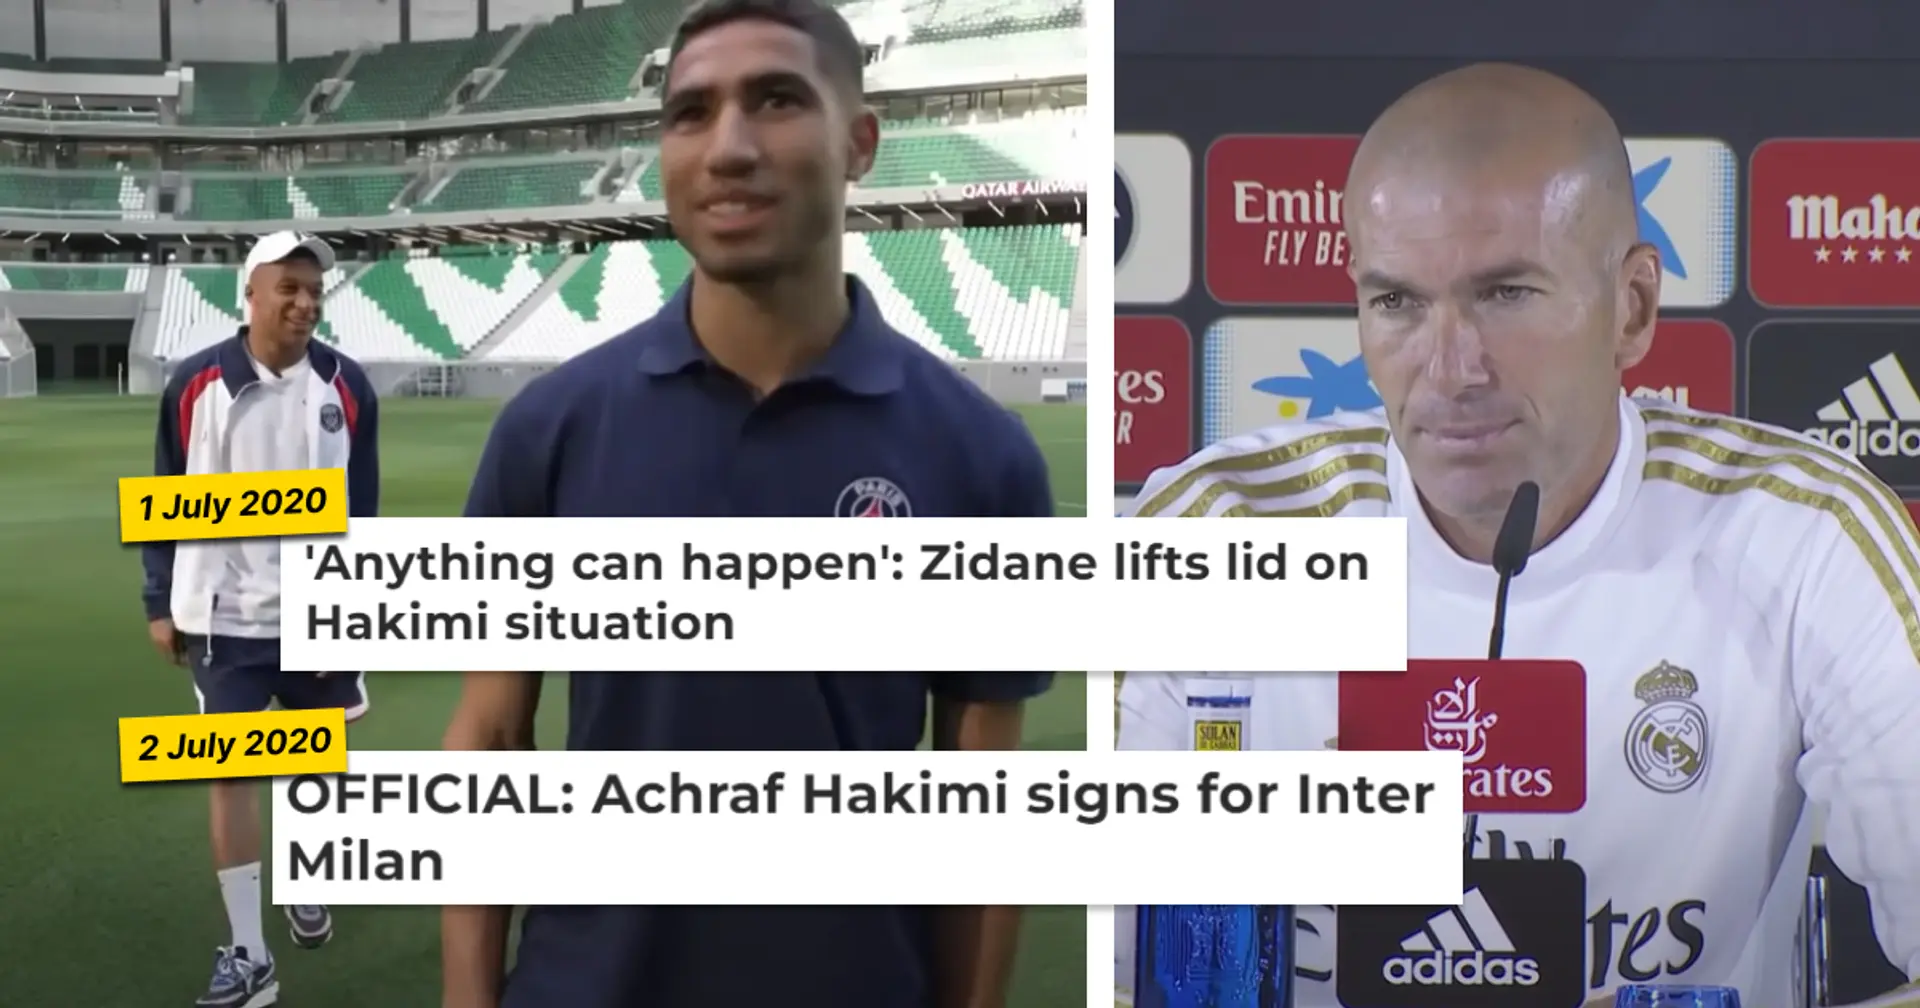 Why did Real Madrid let Hakimi go so easily? Explained